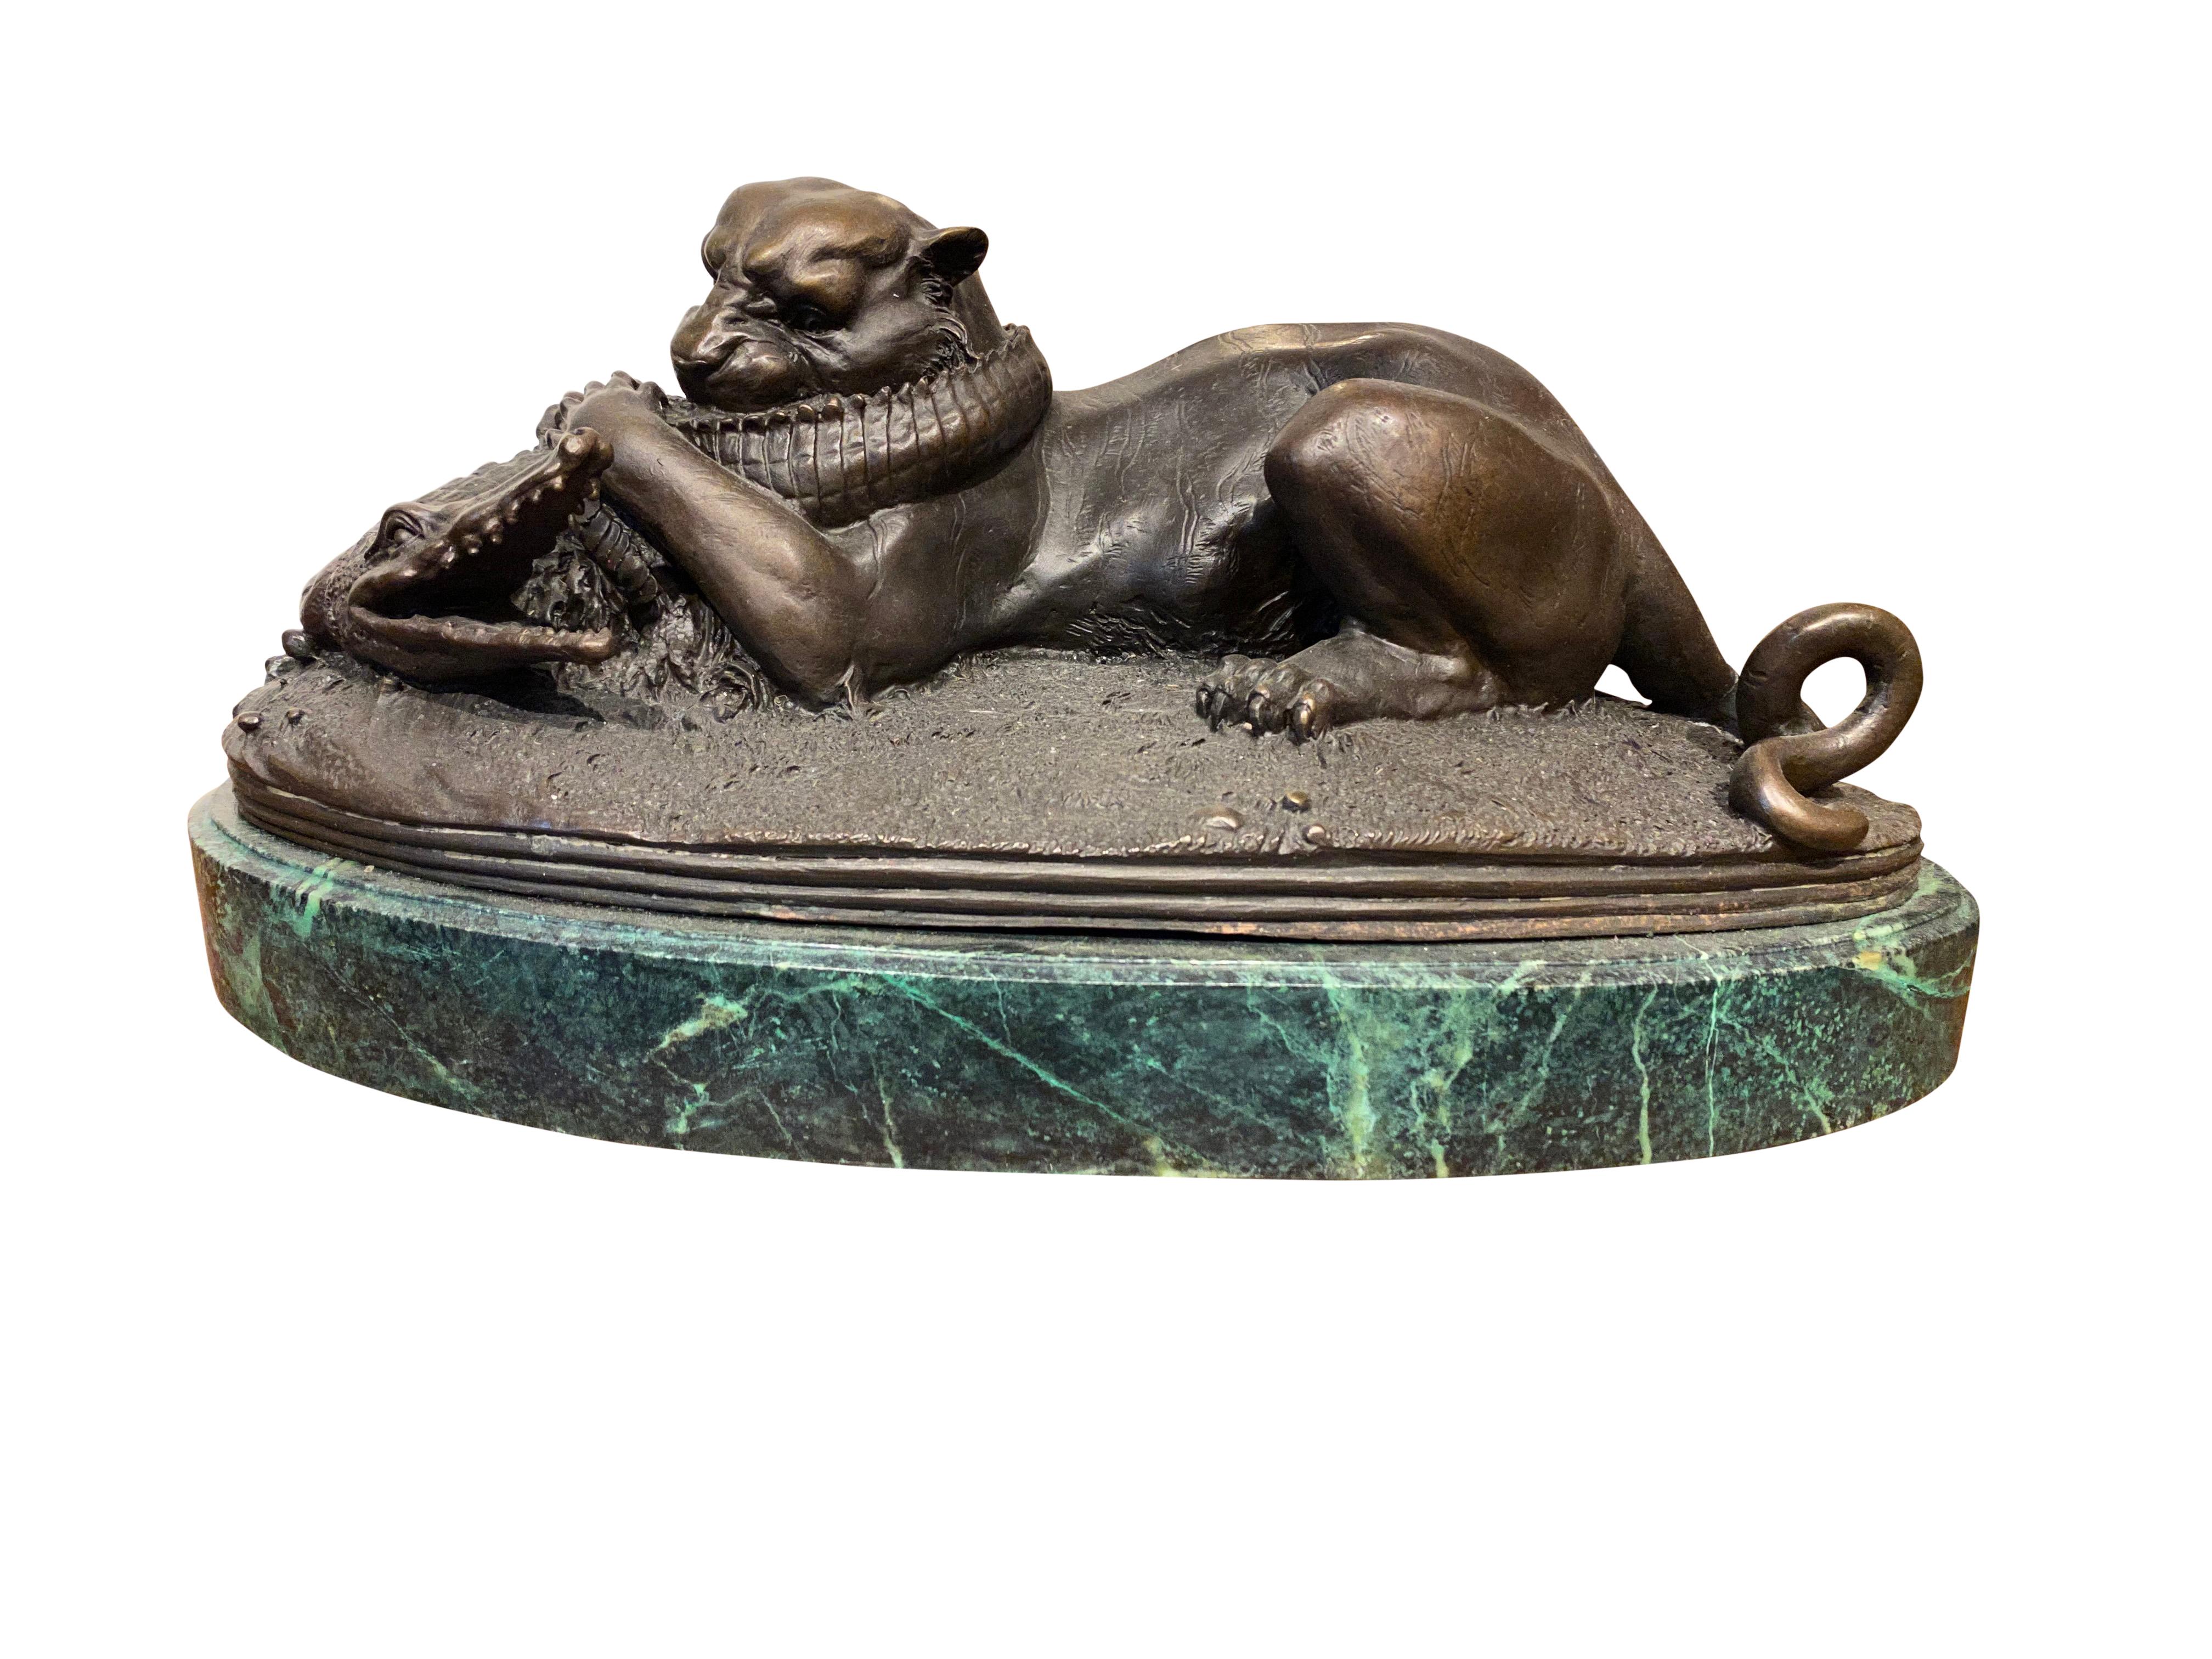 A stunning bronze sculpture of panther and crocodile fight, 20th century. The Spectacular scene depicts a panther and a crocodile in battle. It has a beautiful dark brown patina, and sits on an oval of verde marble. Wonderful details! The cat's